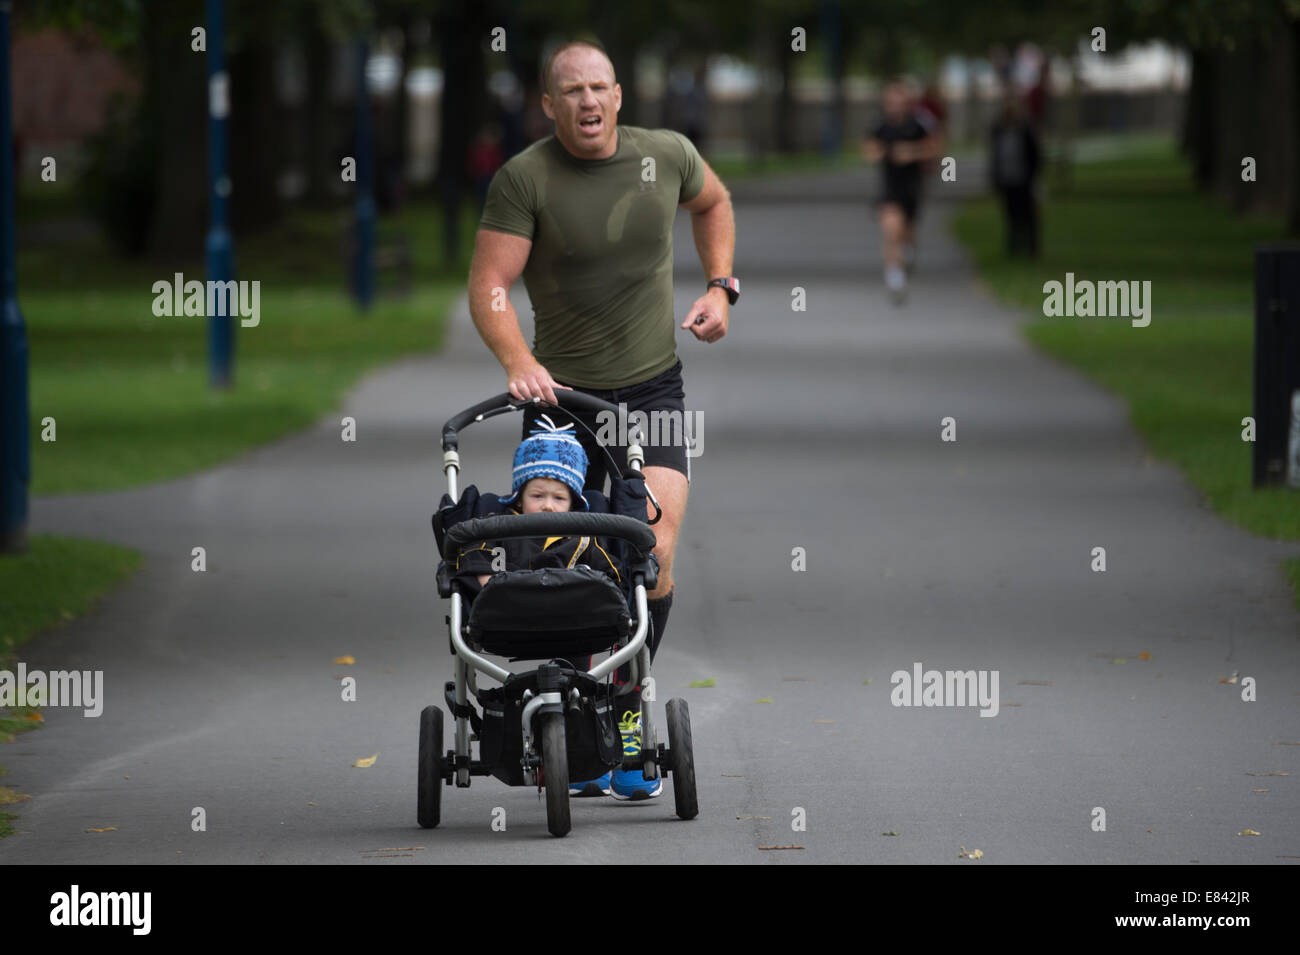 A man pushing a buggy taking part in the global weekly 5k Adidas-sponsored  'ParkRun' in Plascrug avenue, Aberystwyth Wales UK Stock Photo - Alamy